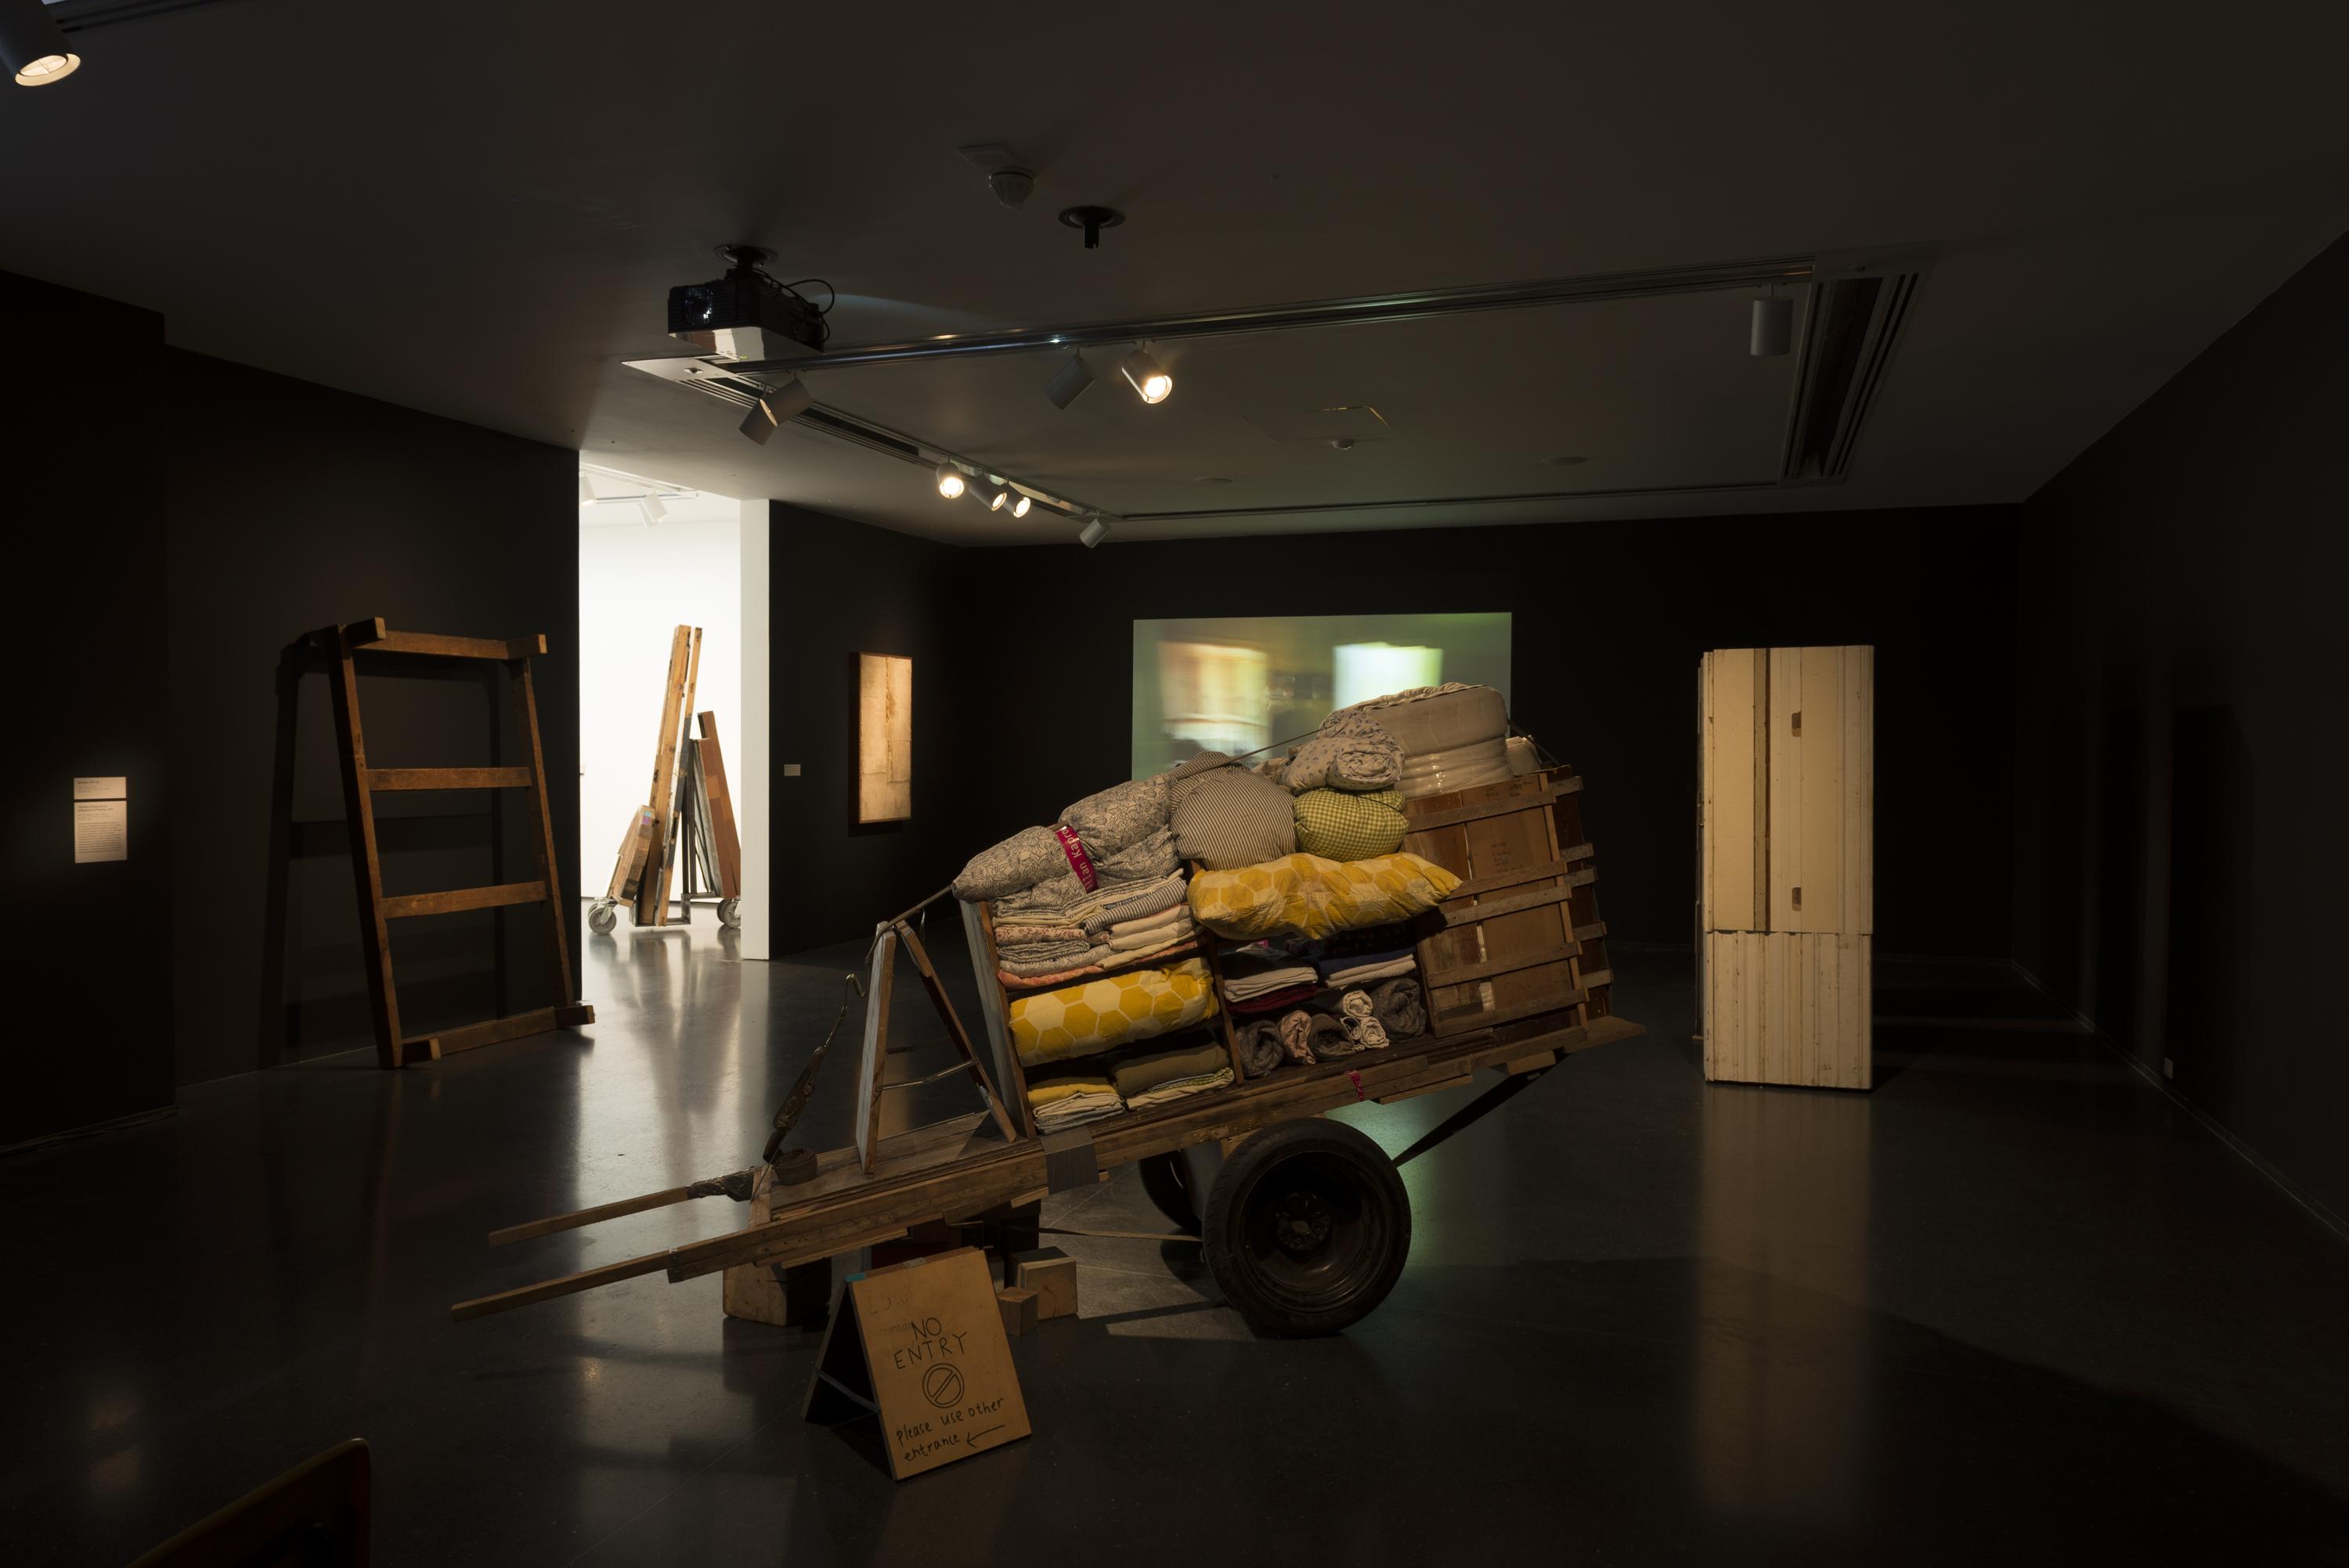 The setting is a dark room with black walls. In the middle is a makeshift wooden two-wheeled hand cart loaded with yellow and grey folded fabrics. On the back wall, a video is playing.